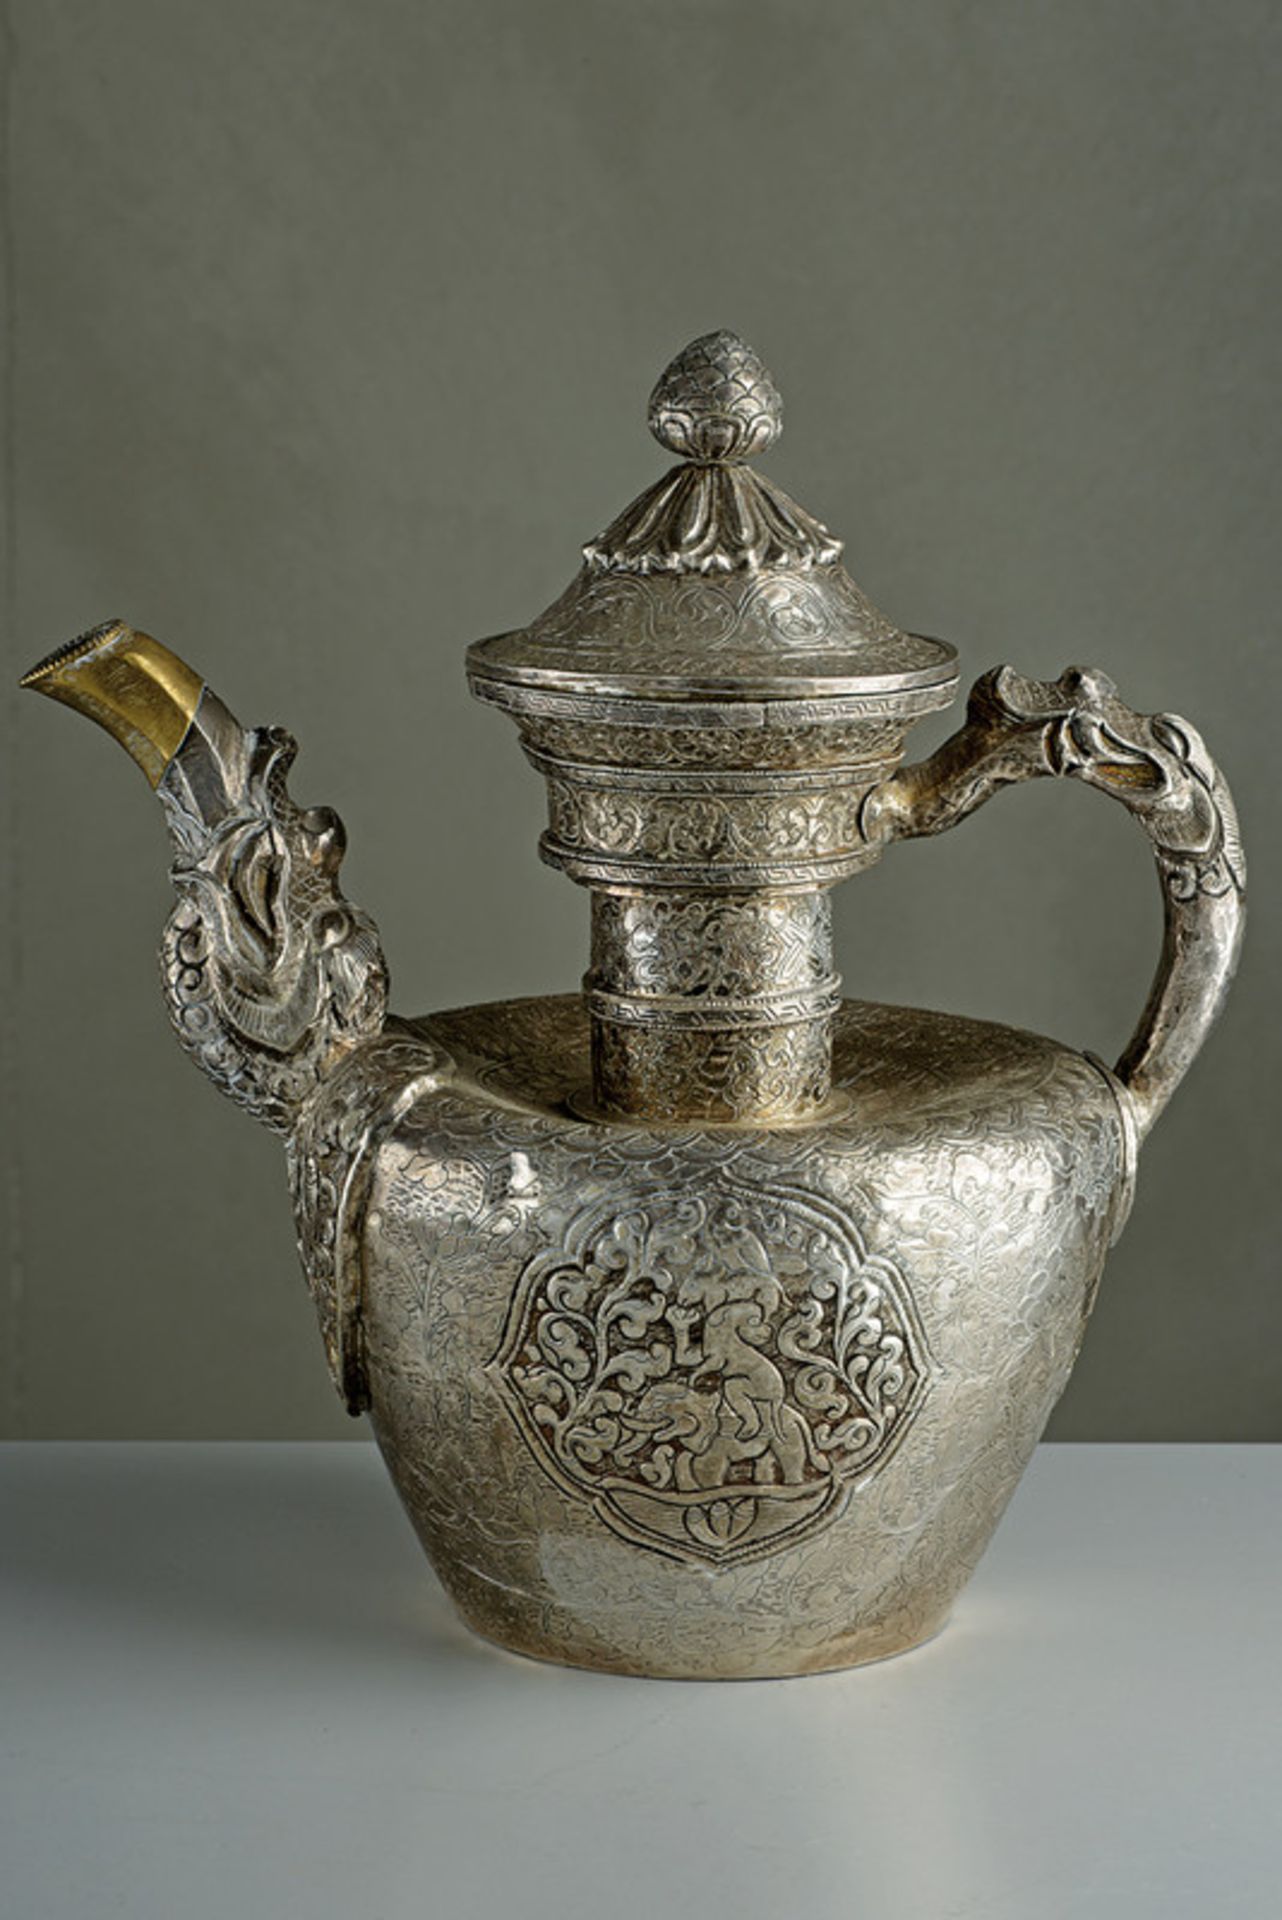 A chiselled silver teapot